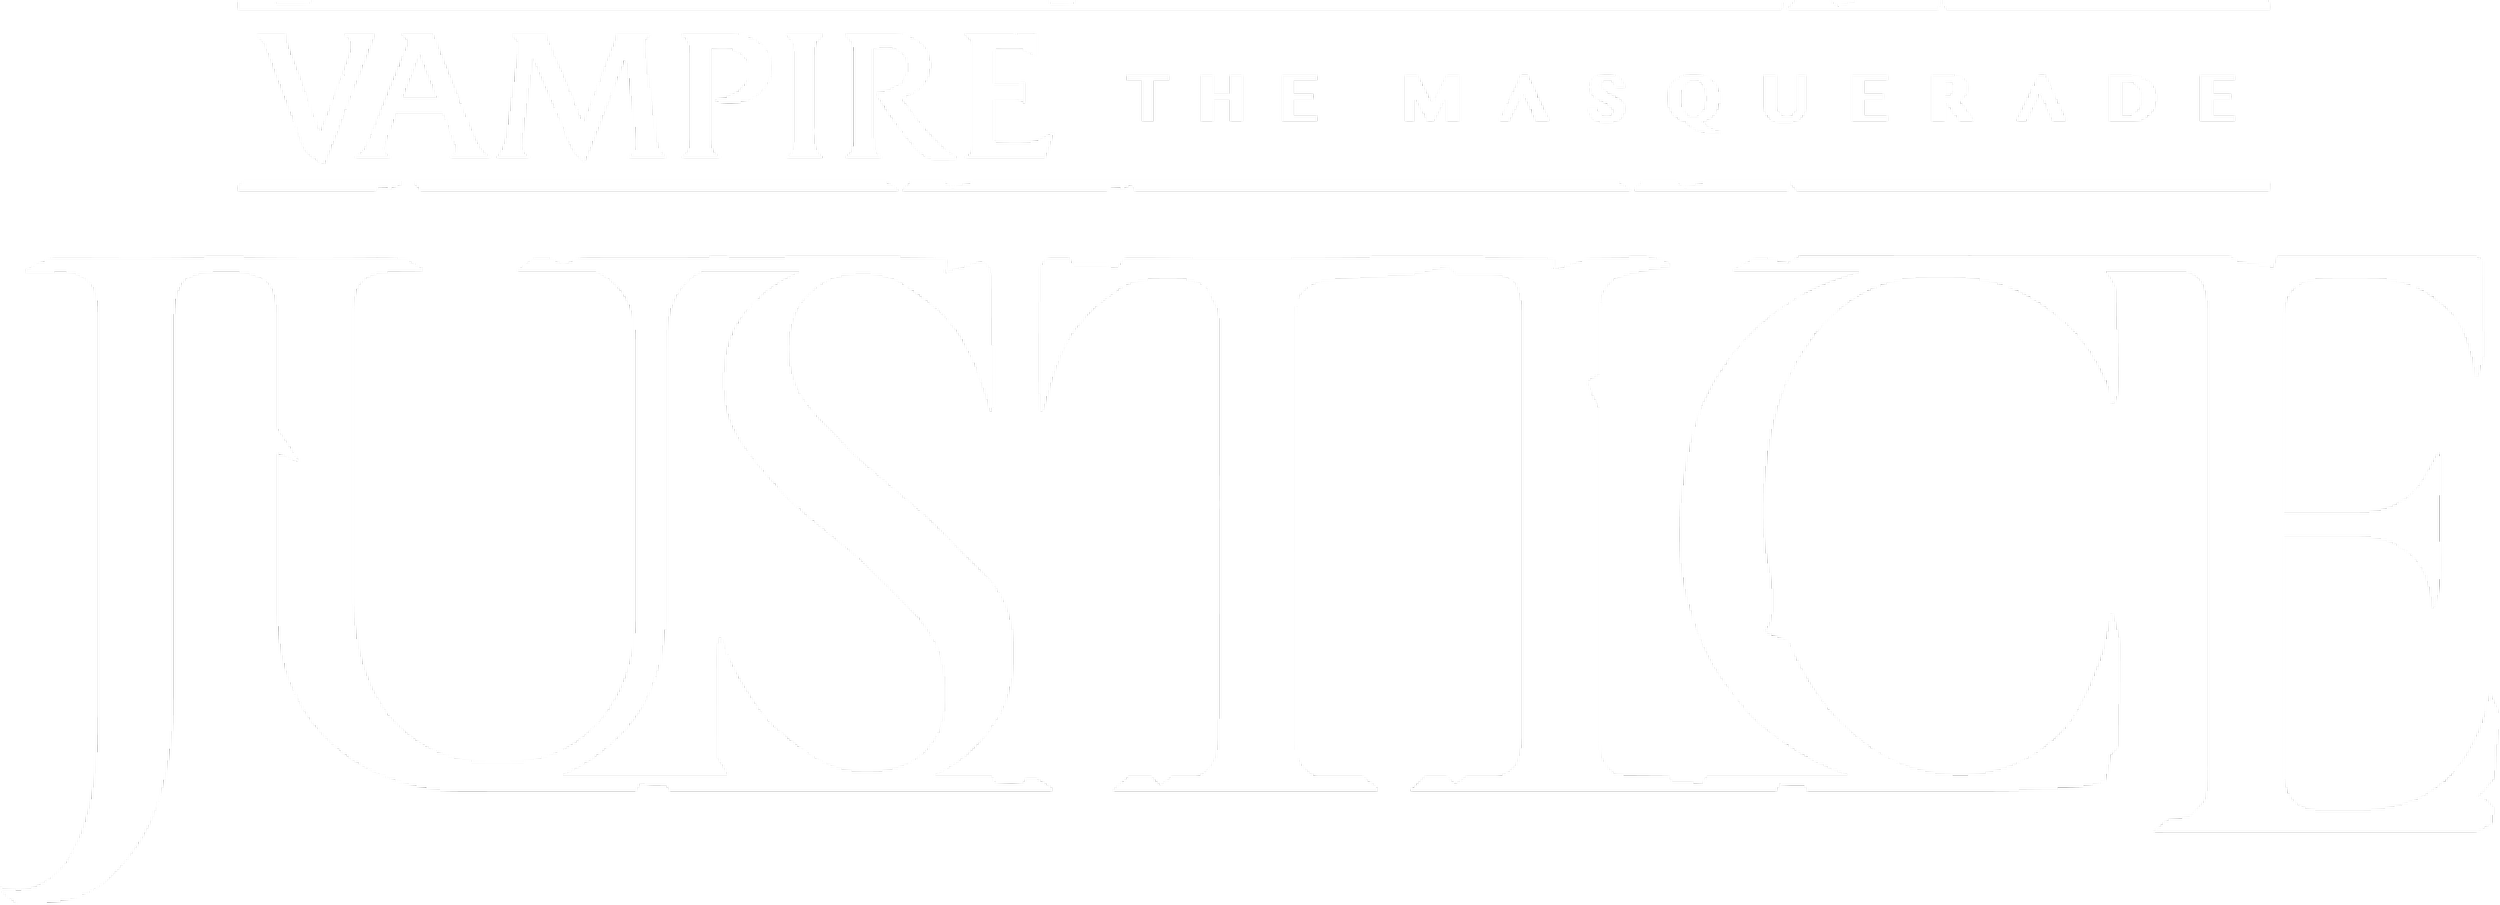 Vampire The Masquerade Justice VR Review on Quest 3 and PSVR 2